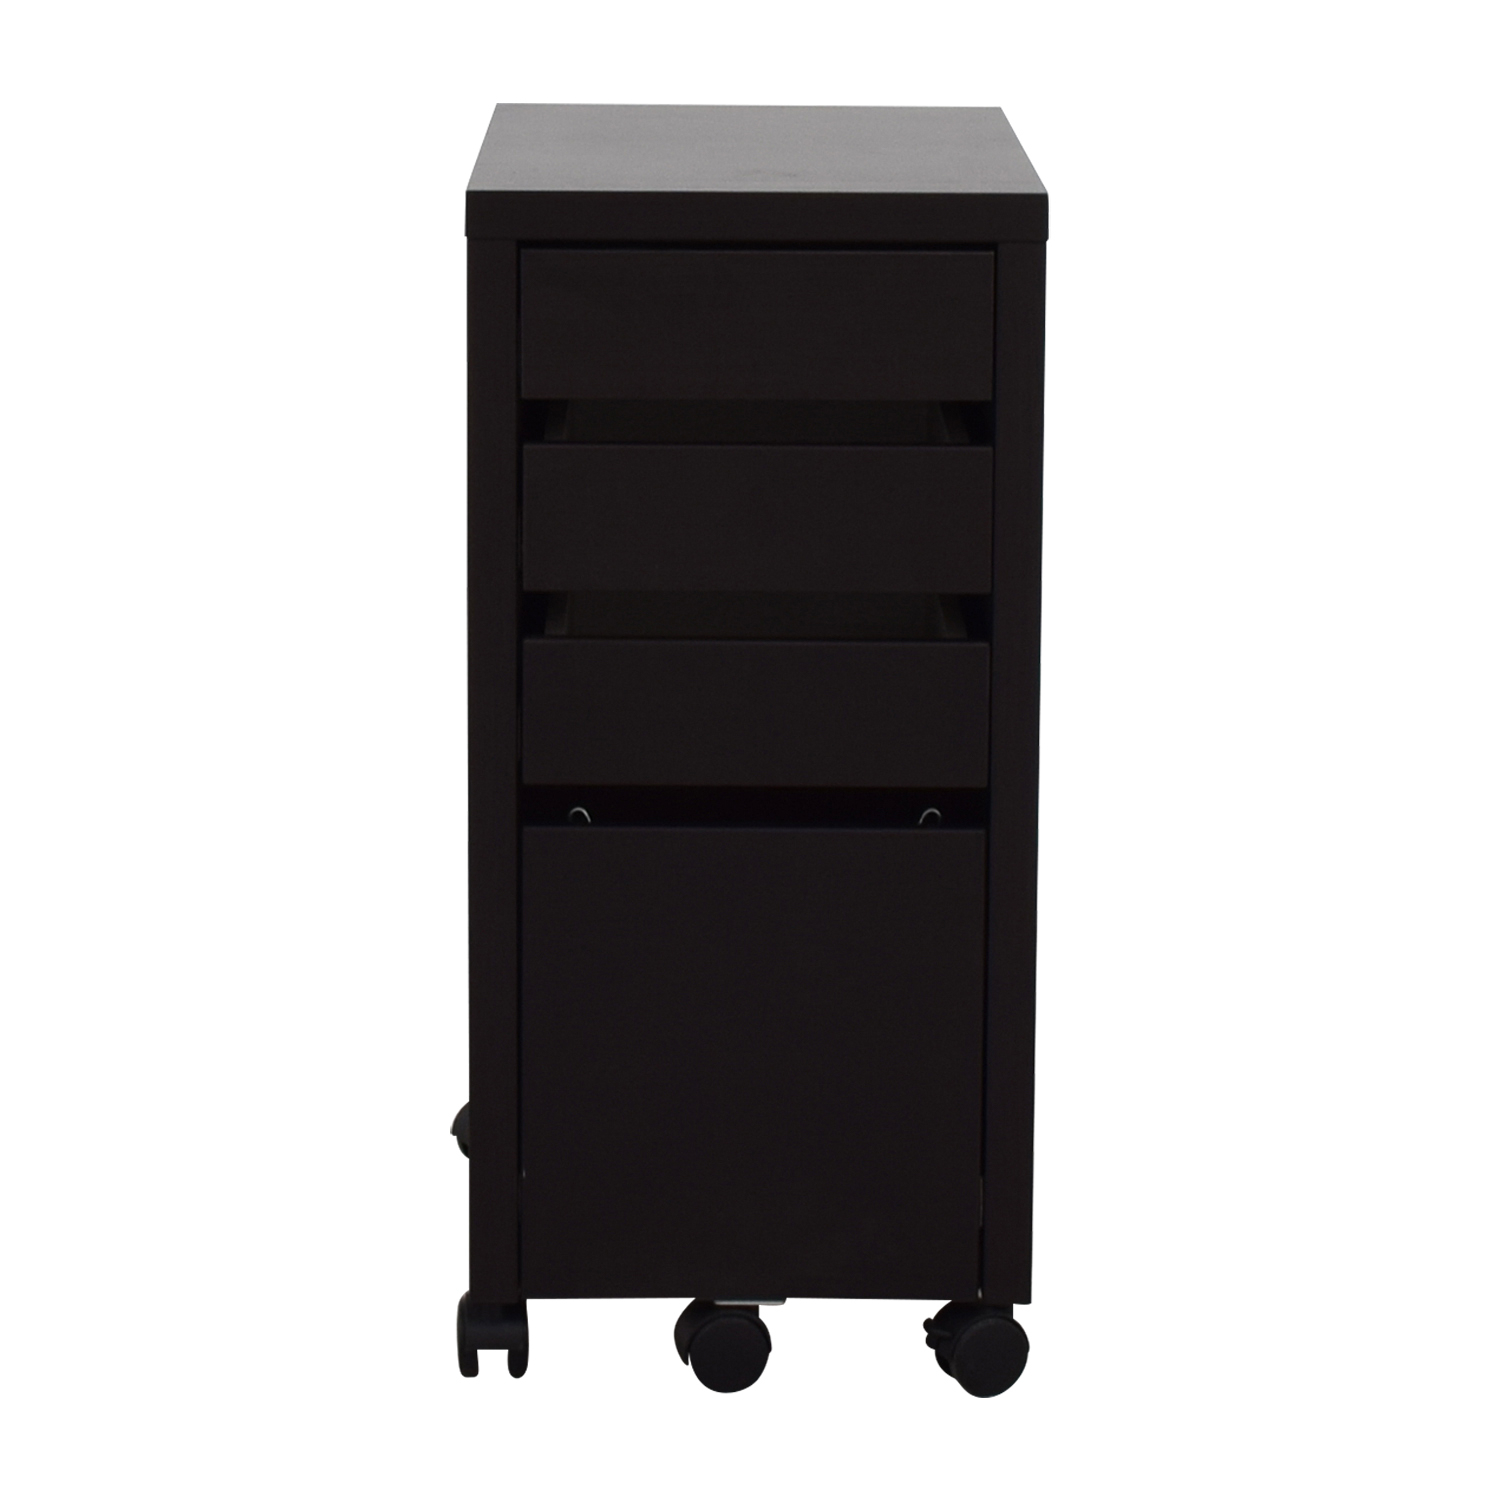 84 Off Staples Staples Black File Cabinet Storage intended for proportions 1500 X 1500